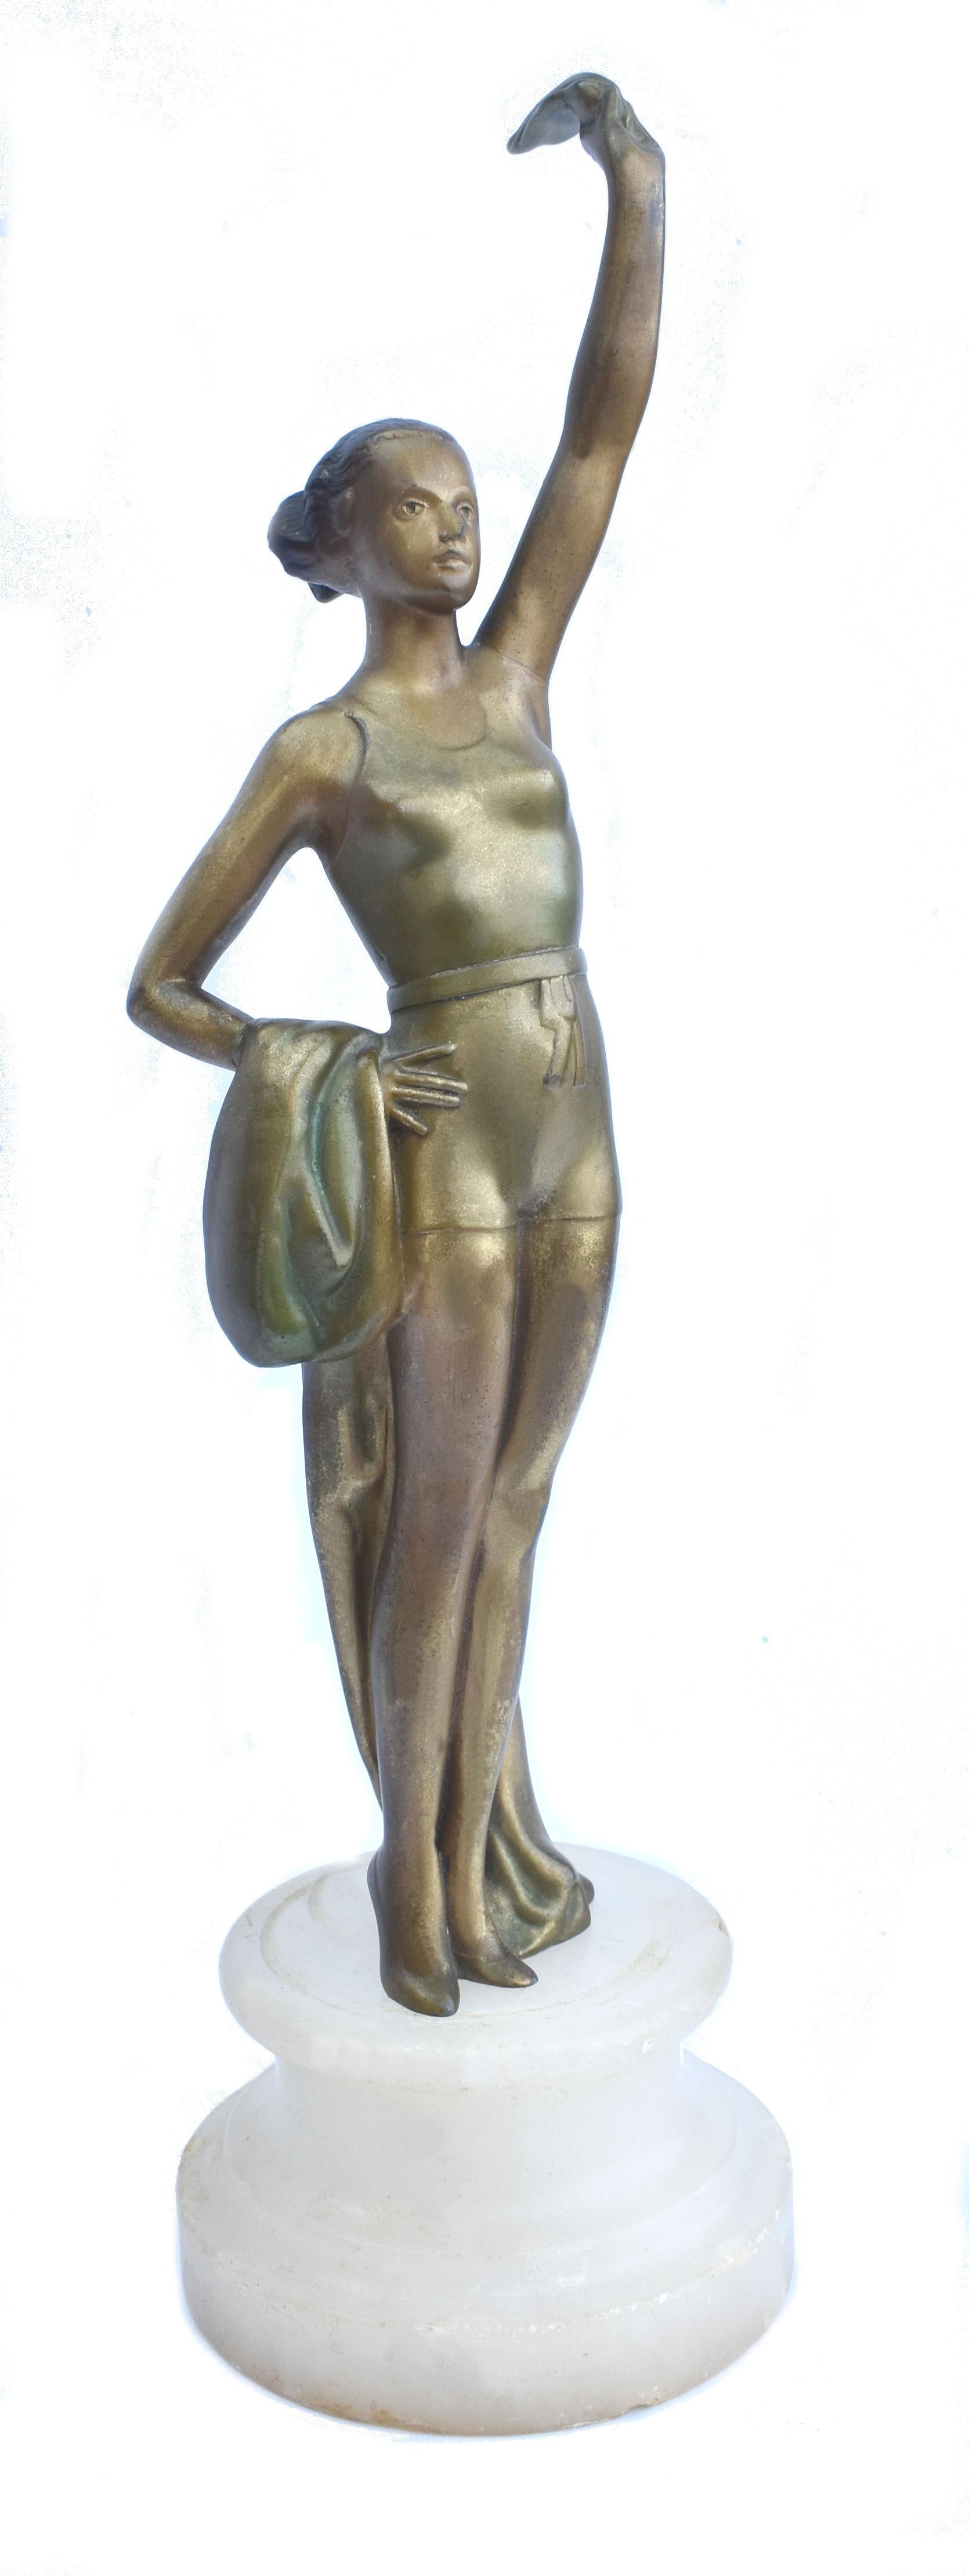 For your consideration is this very attractive and original Art Deco cold painted Spelter figurine of a swimmer, holding a large plume in her outstretched hand and a draped shawl/ towel over her other arm. She stands an impressive 13 inches high